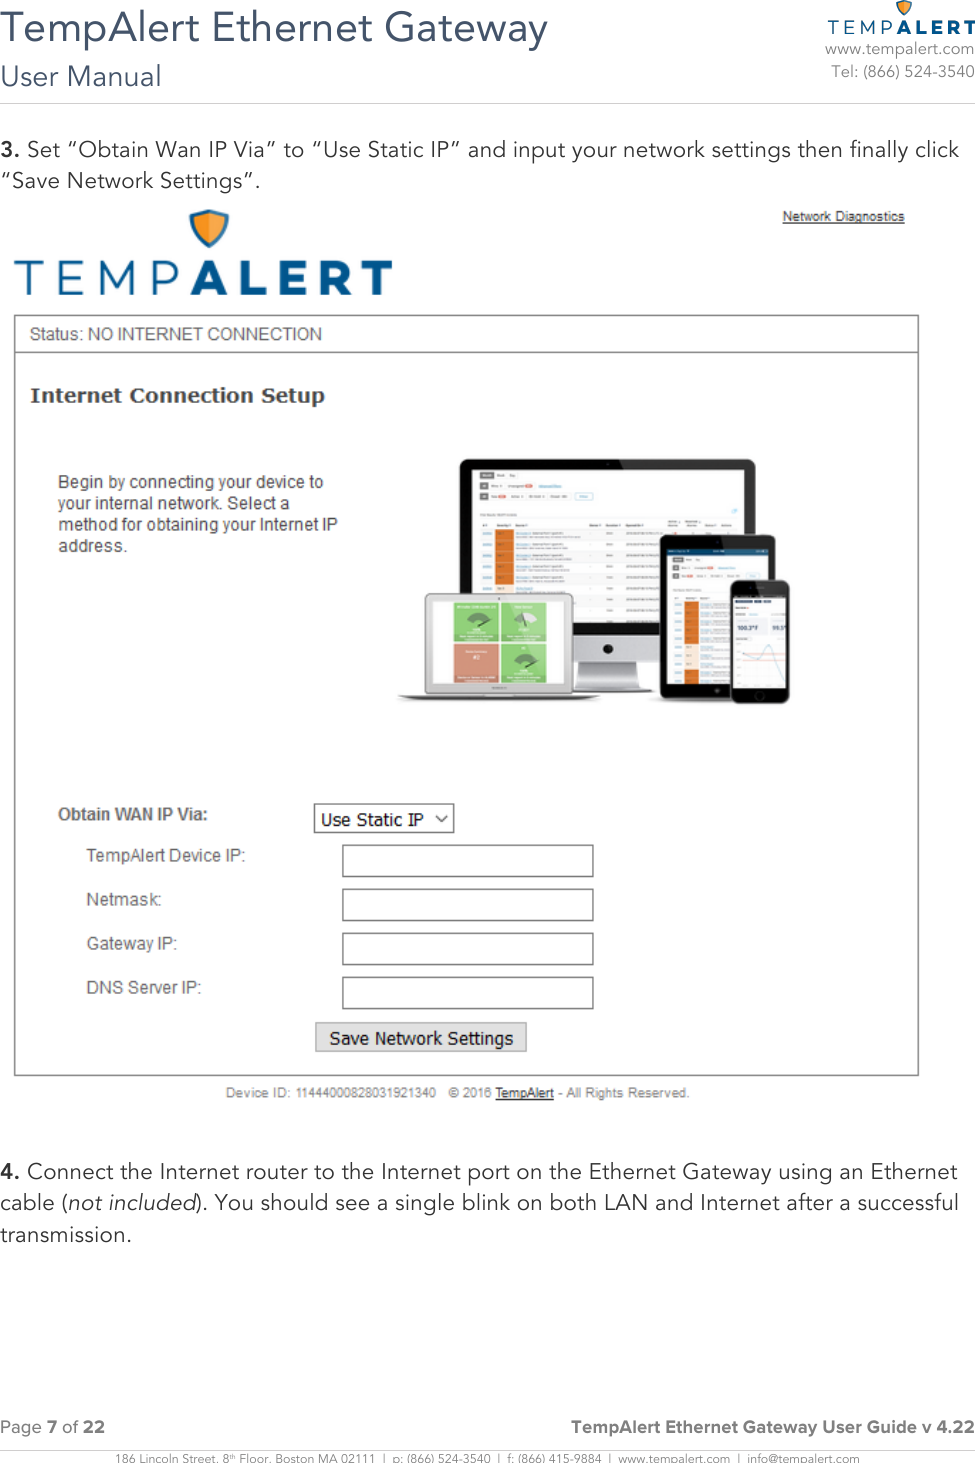 TempAlert Ethernet Gateway User Manual   www.tempalert.com Tel: (866) 524-3540  Page 7 of 22     TempAlert Ethernet Gateway User Guide v 4.22  186 Lincoln Street, 8th Floor, Boston MA 02111  |  p: (866) 524-3540  |  f: (866) 415-9884  |  www.tempalert.com  |  info@tempalert.com    3. Set “Obtain Wan IP Via” to “Use Static IP” and input your network settings then finally click “Save Network Settings”.   4. Connect the Internet router to the Internet port on the Ethernet Gateway using an Ethernet cable (not included). You should see a single blink on both LAN and Internet after a successful transmission. 